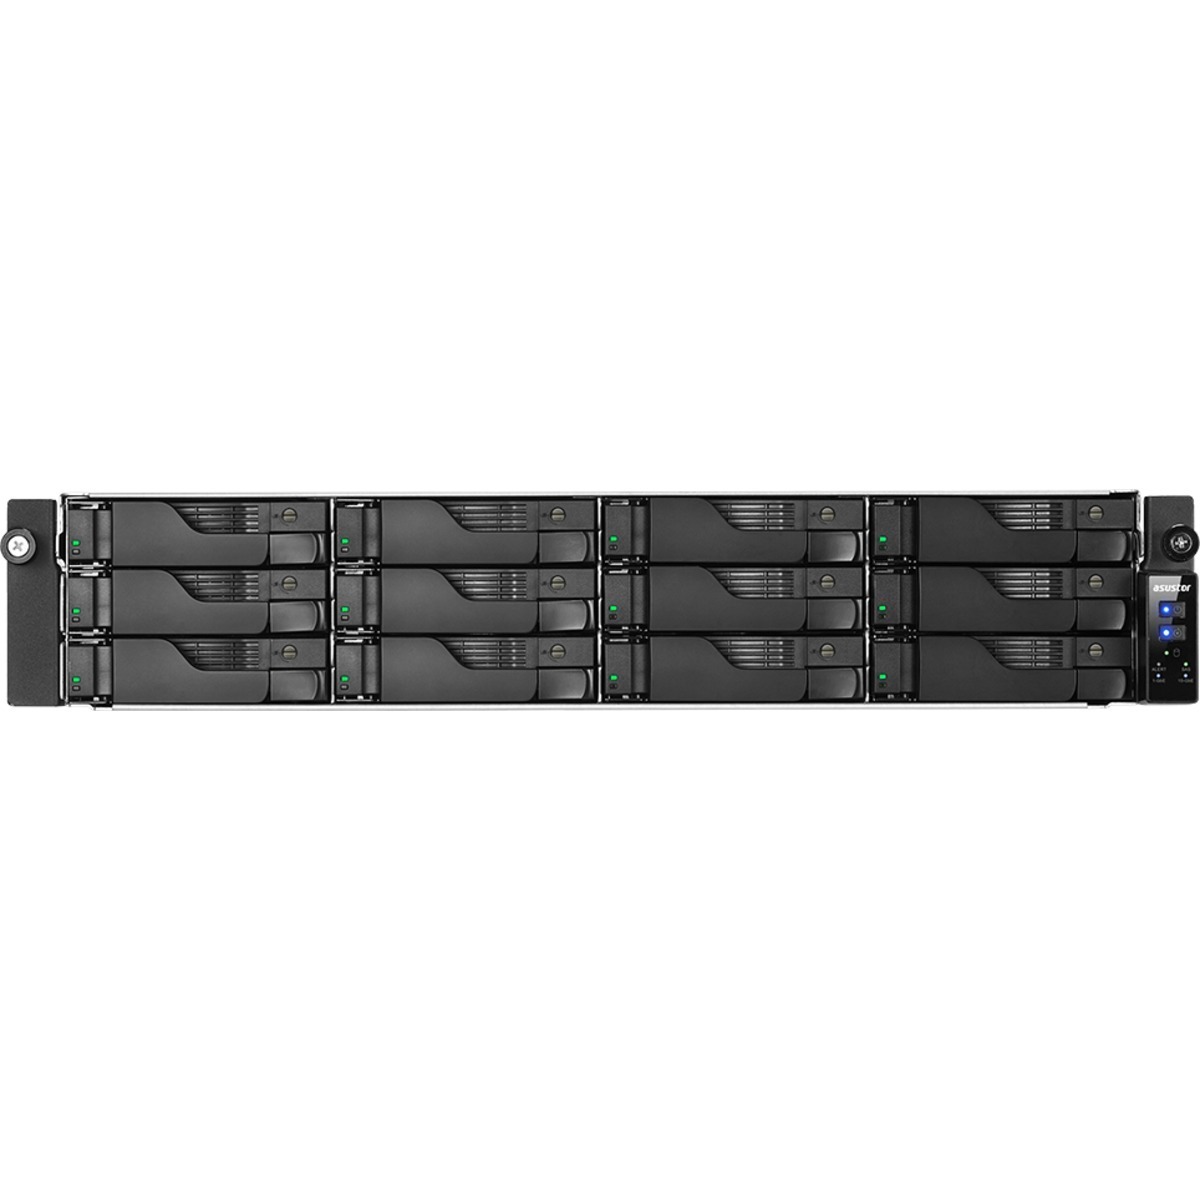 buy $5022 ASUSTOR AS7112RDX Lockerstor 12R Pro 12tb RackMount NAS - Network Attached Storage Device 12x1000gb Samsung 870 QVO MZ-77Q1T0 2.5 SATA 6Gb/s SSD CONSUMER Class Drives Installed - Burn-In Tested - nas headquarters buy network attached storage server device das new raid-5 free shipping usa AS7112RDX Lockerstor 12R Pro